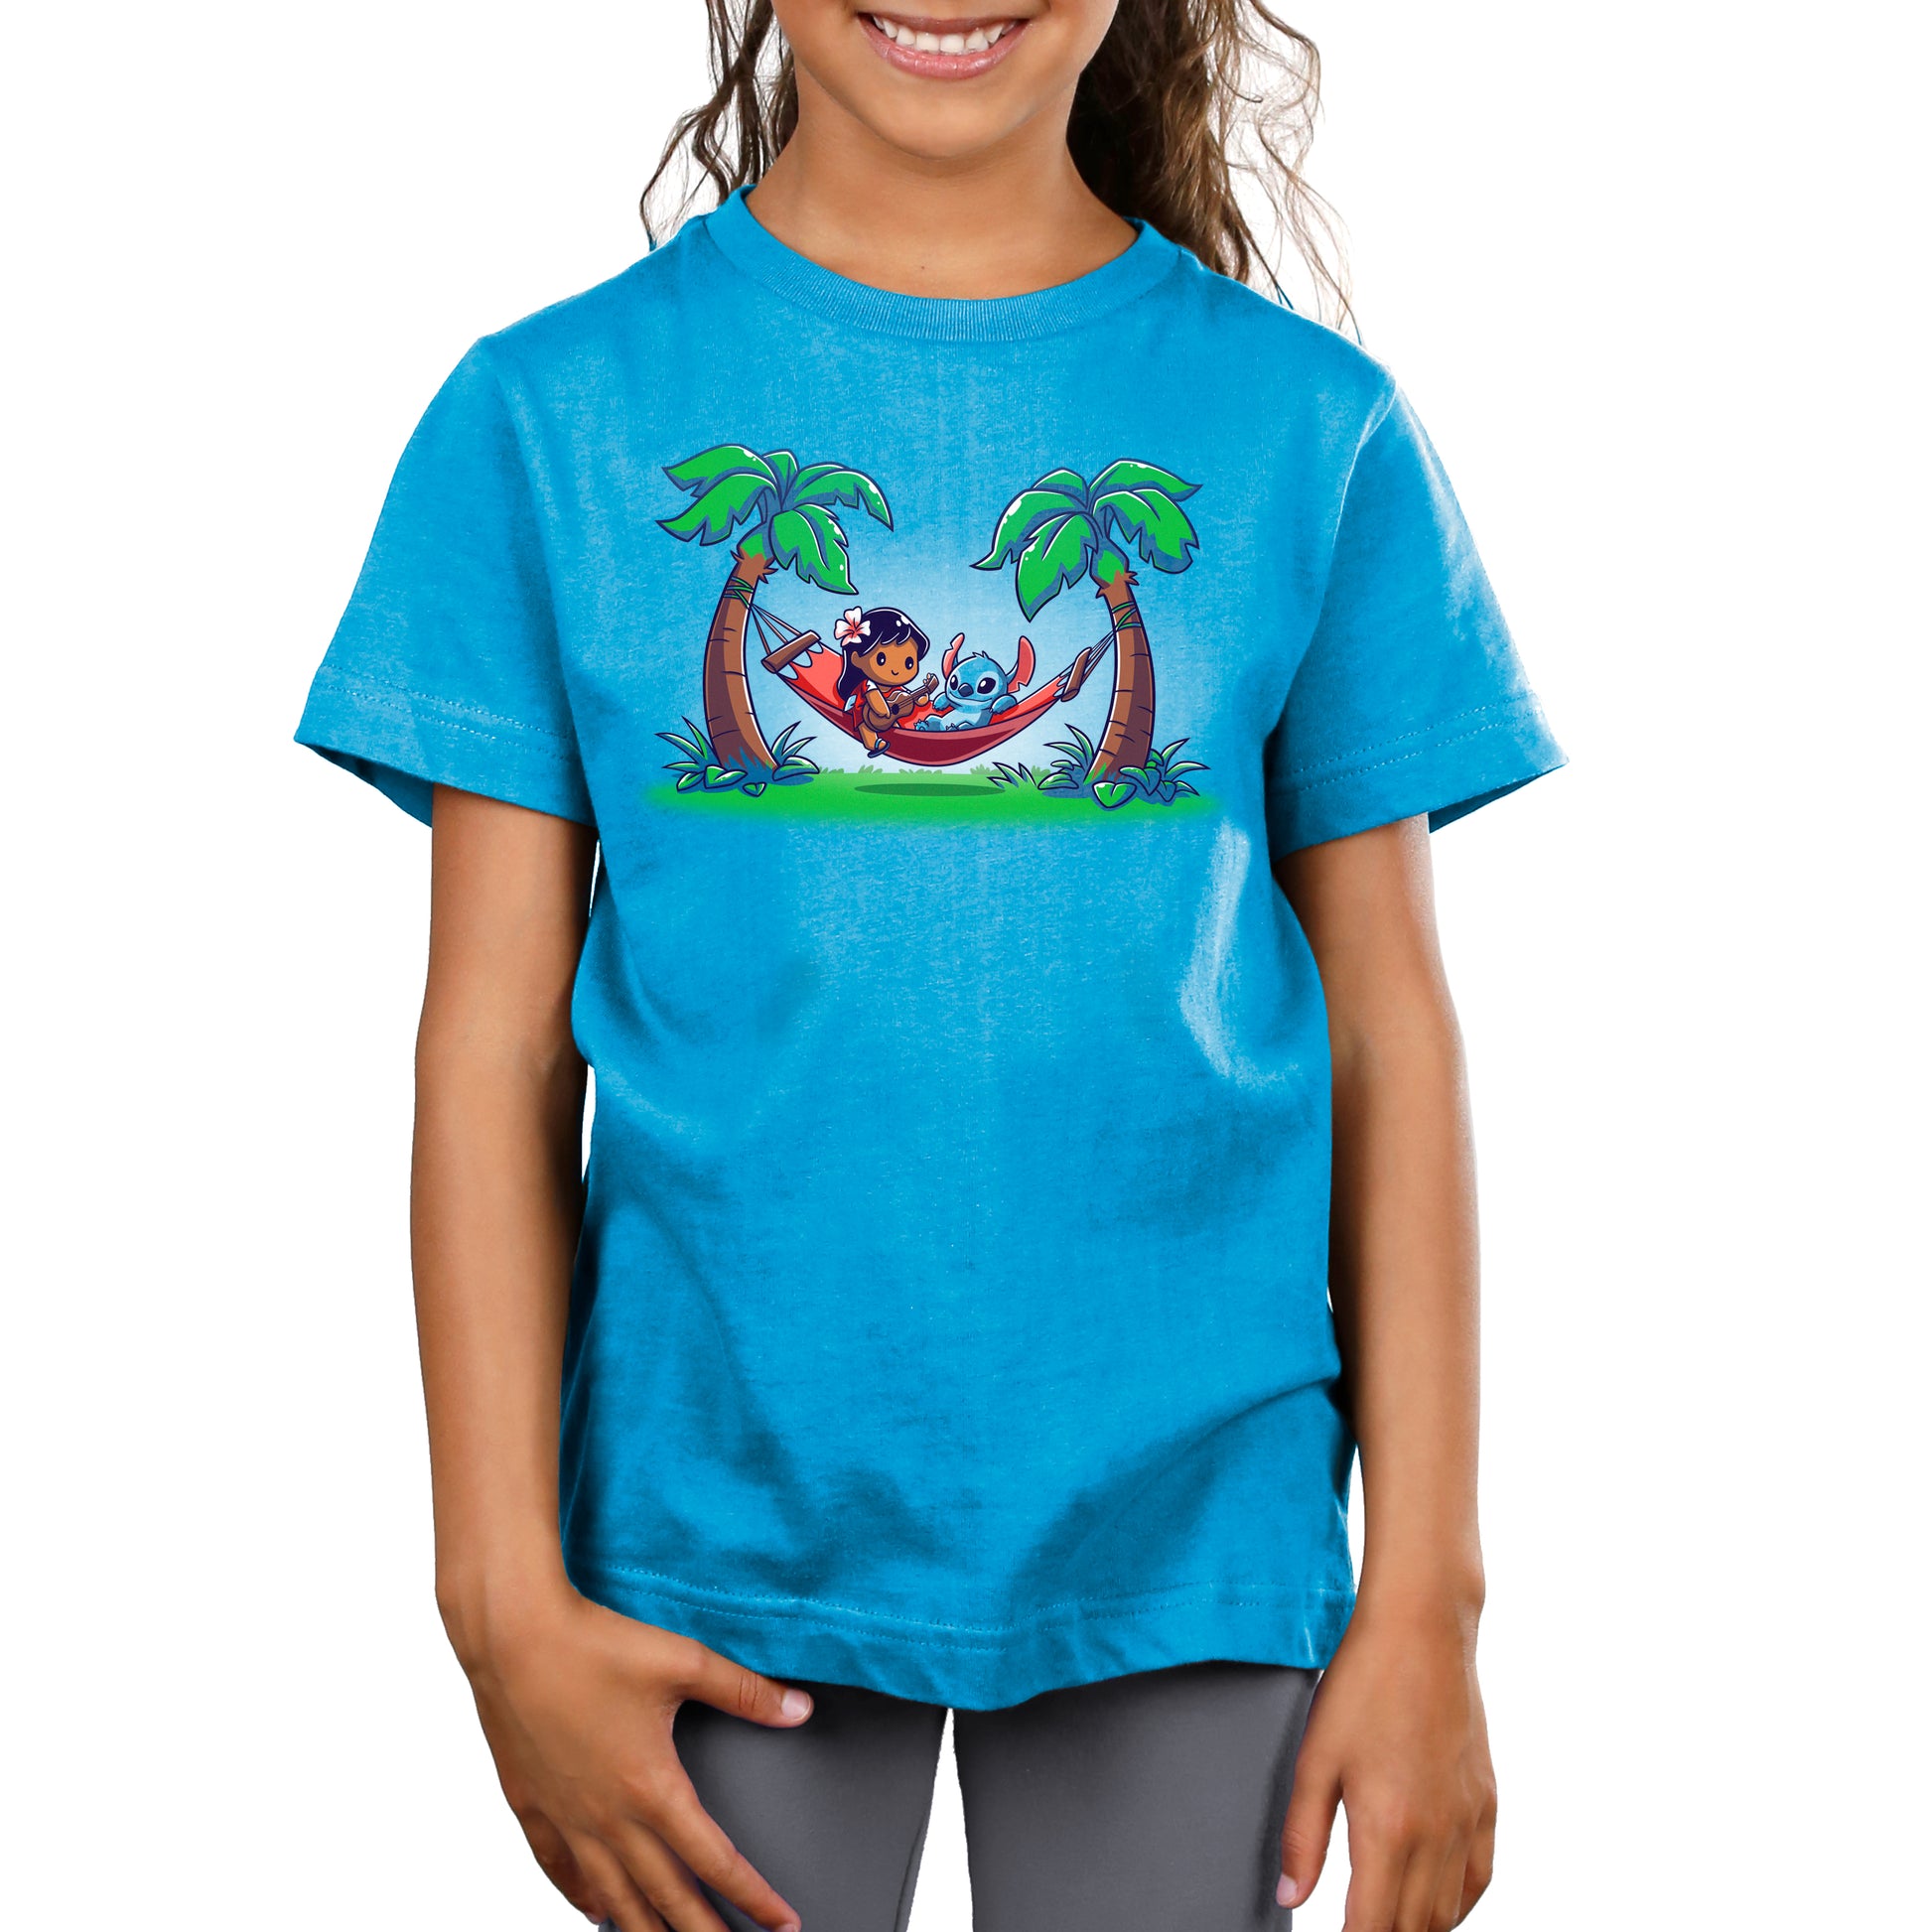 A girl wearing a Disney Lilo and Stitch T-shirt in super soft cotton.